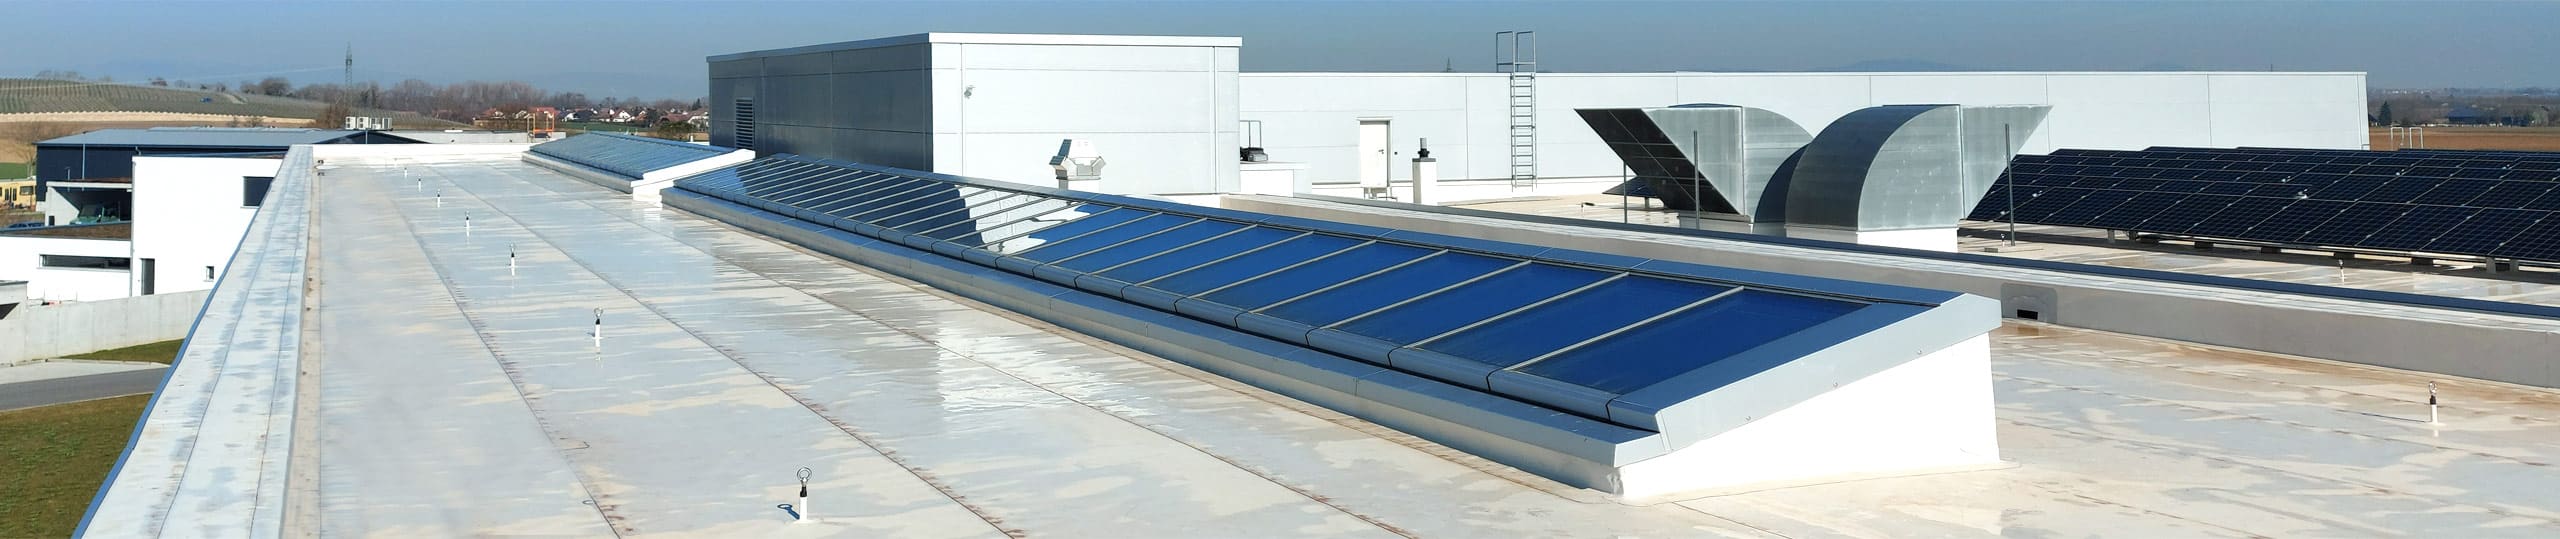 Monopitch rooflights on the flat roof of a company building